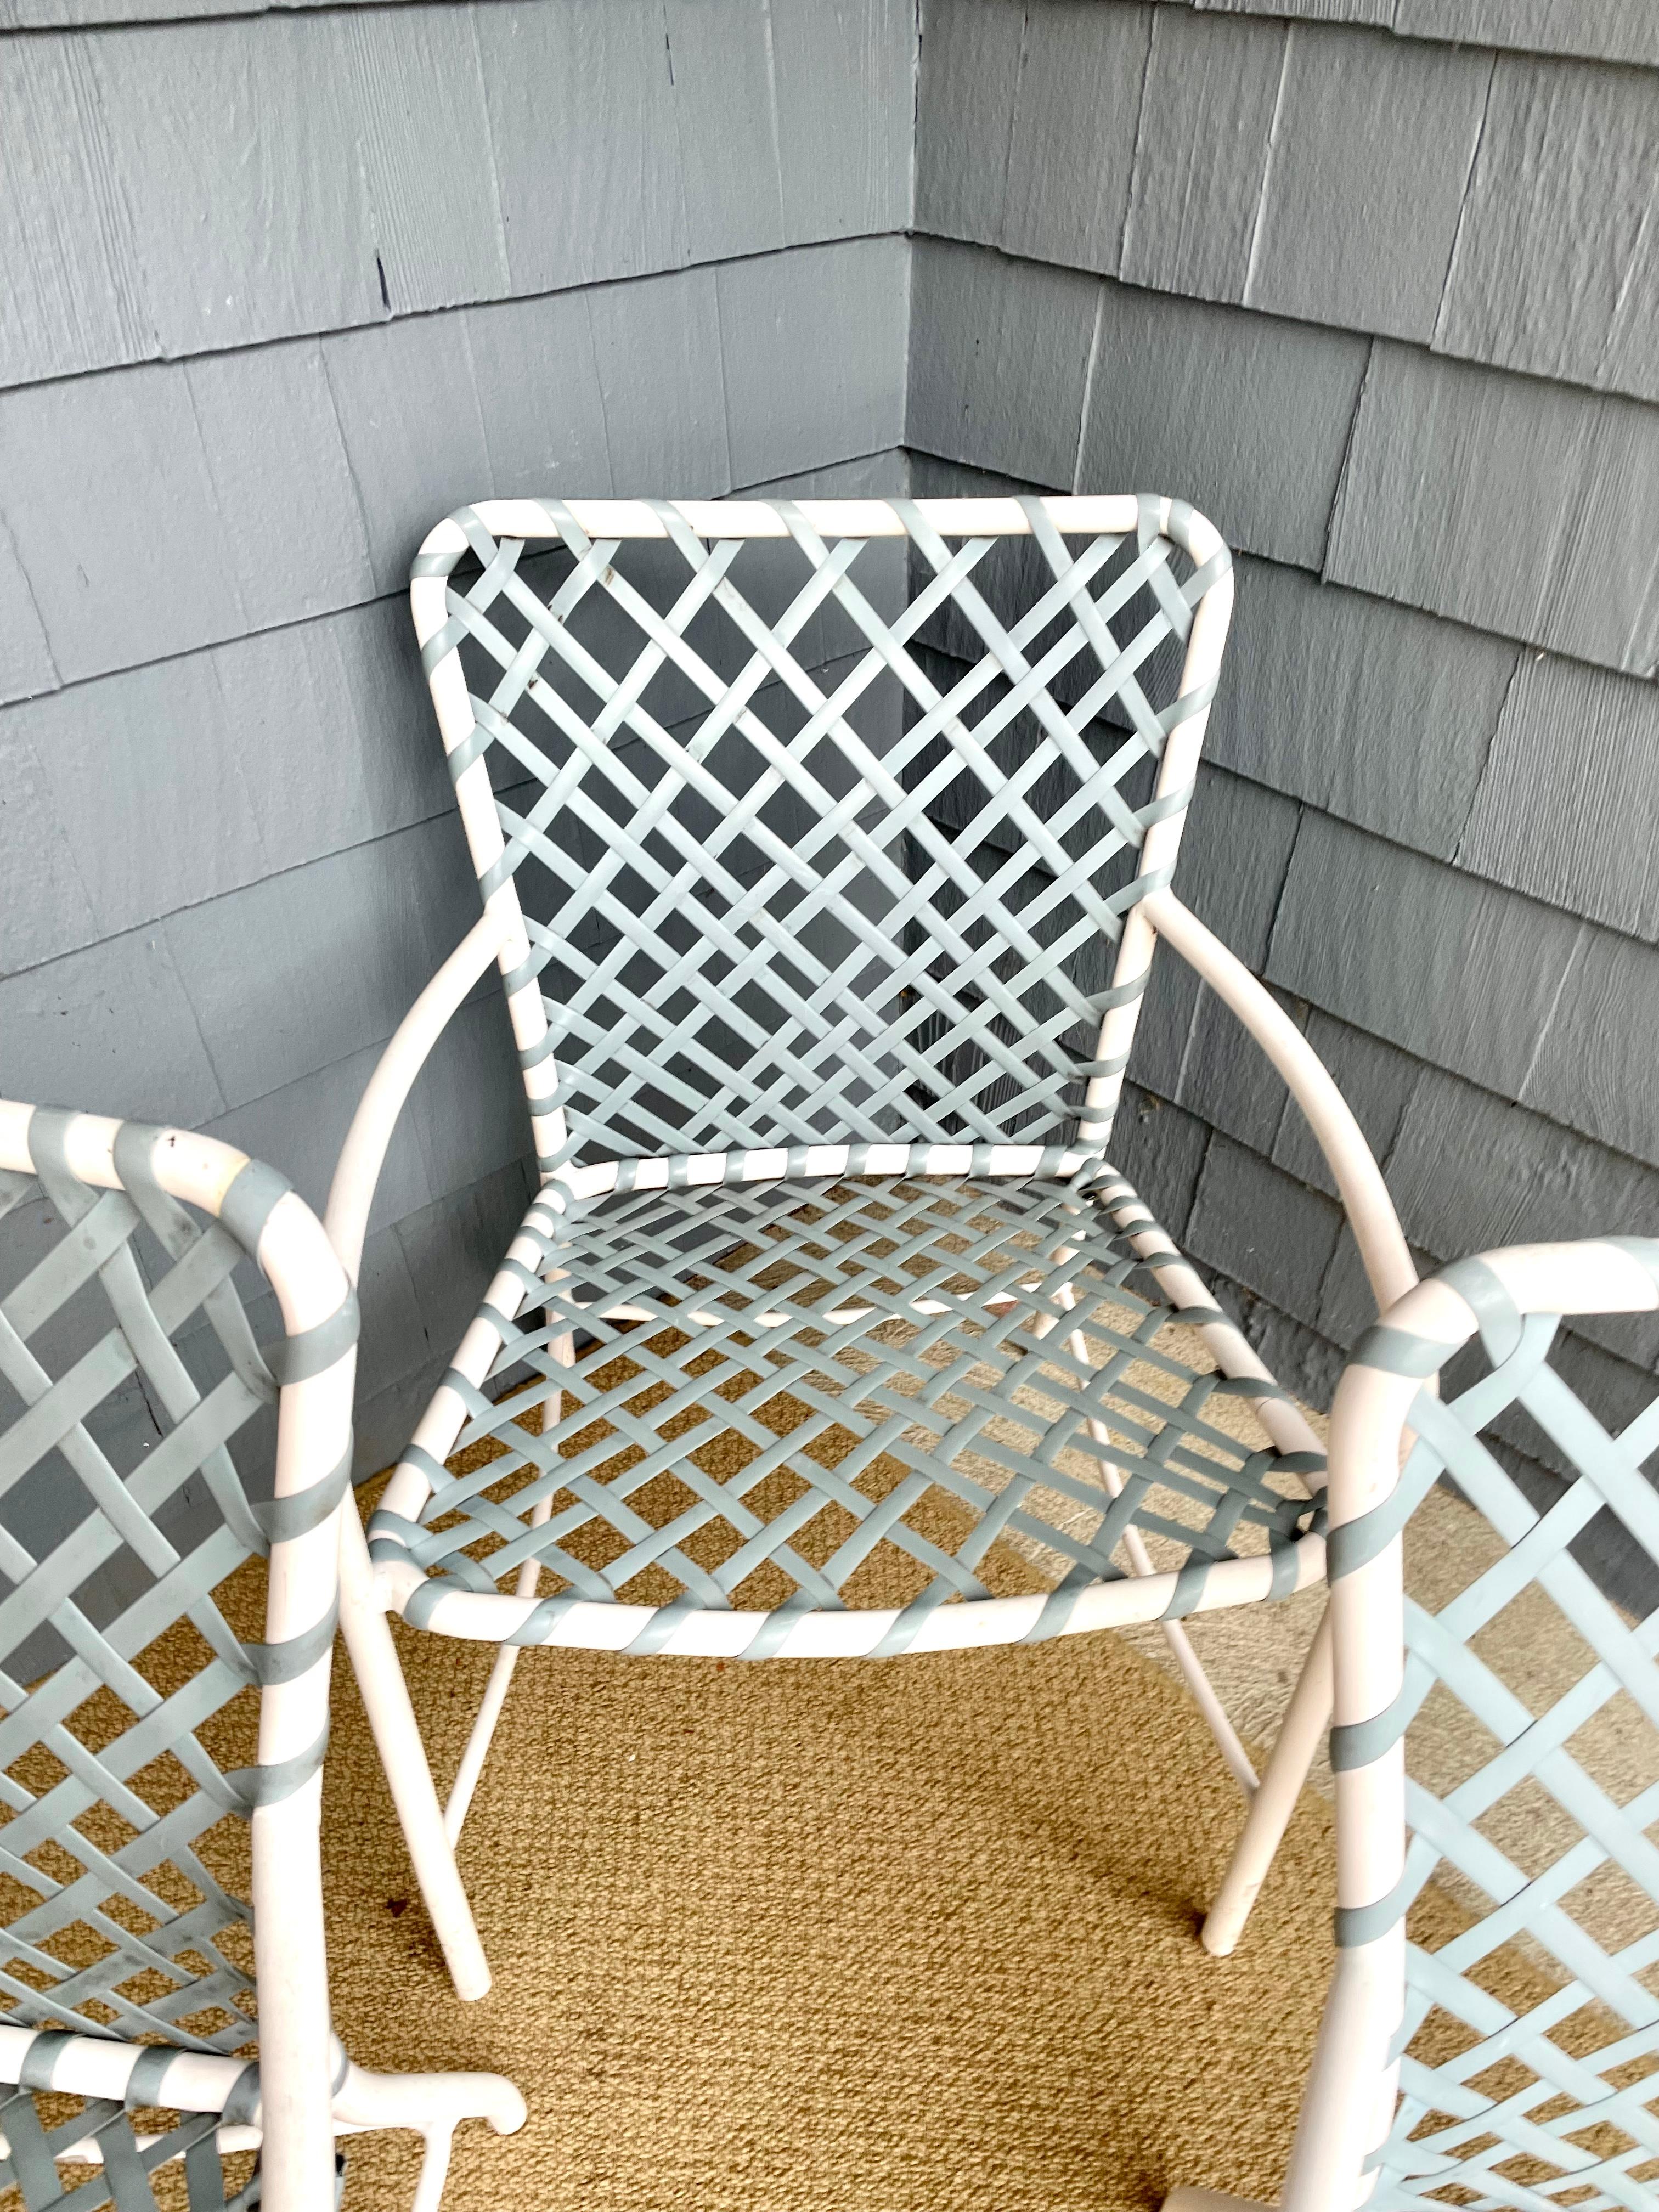 Available now and ready for your enjoyment is A Vintage Tropitone Brown Jordan Outdoor Patio Chairs With Strapping-Set of 4.

This set of Brown Jordan Outdoor Patio Chairs are perfect for pool side relaxation. Place separately or all together you’re